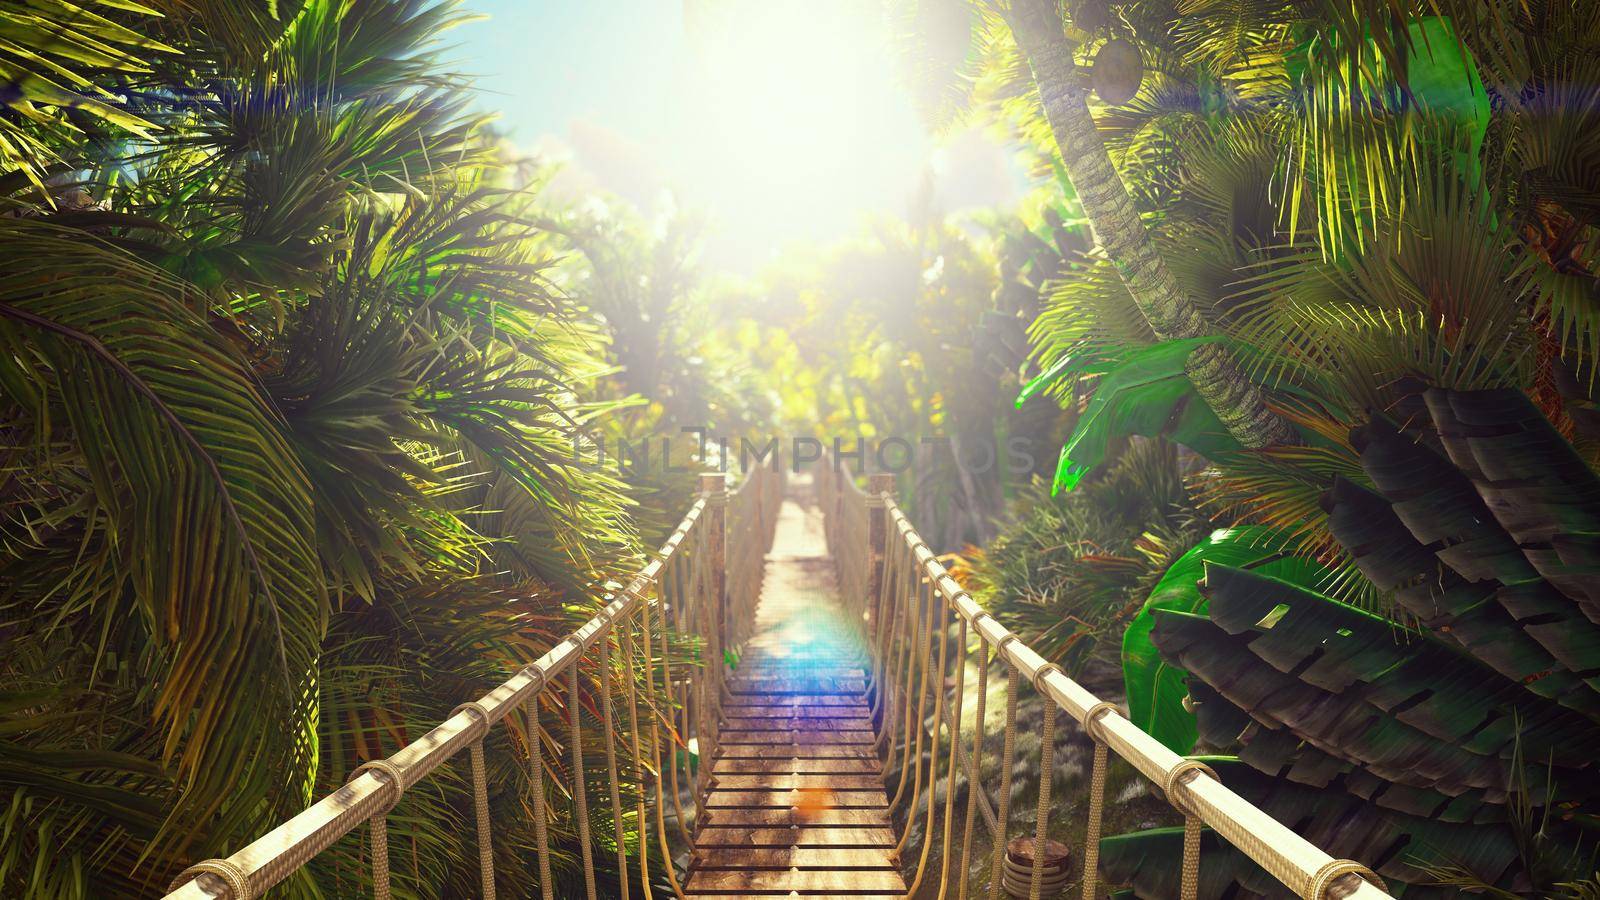 Wooden bridge over the green jungle. Green jungle trees and palm trees with blue sky and bright sun. The Concept Of Travel.